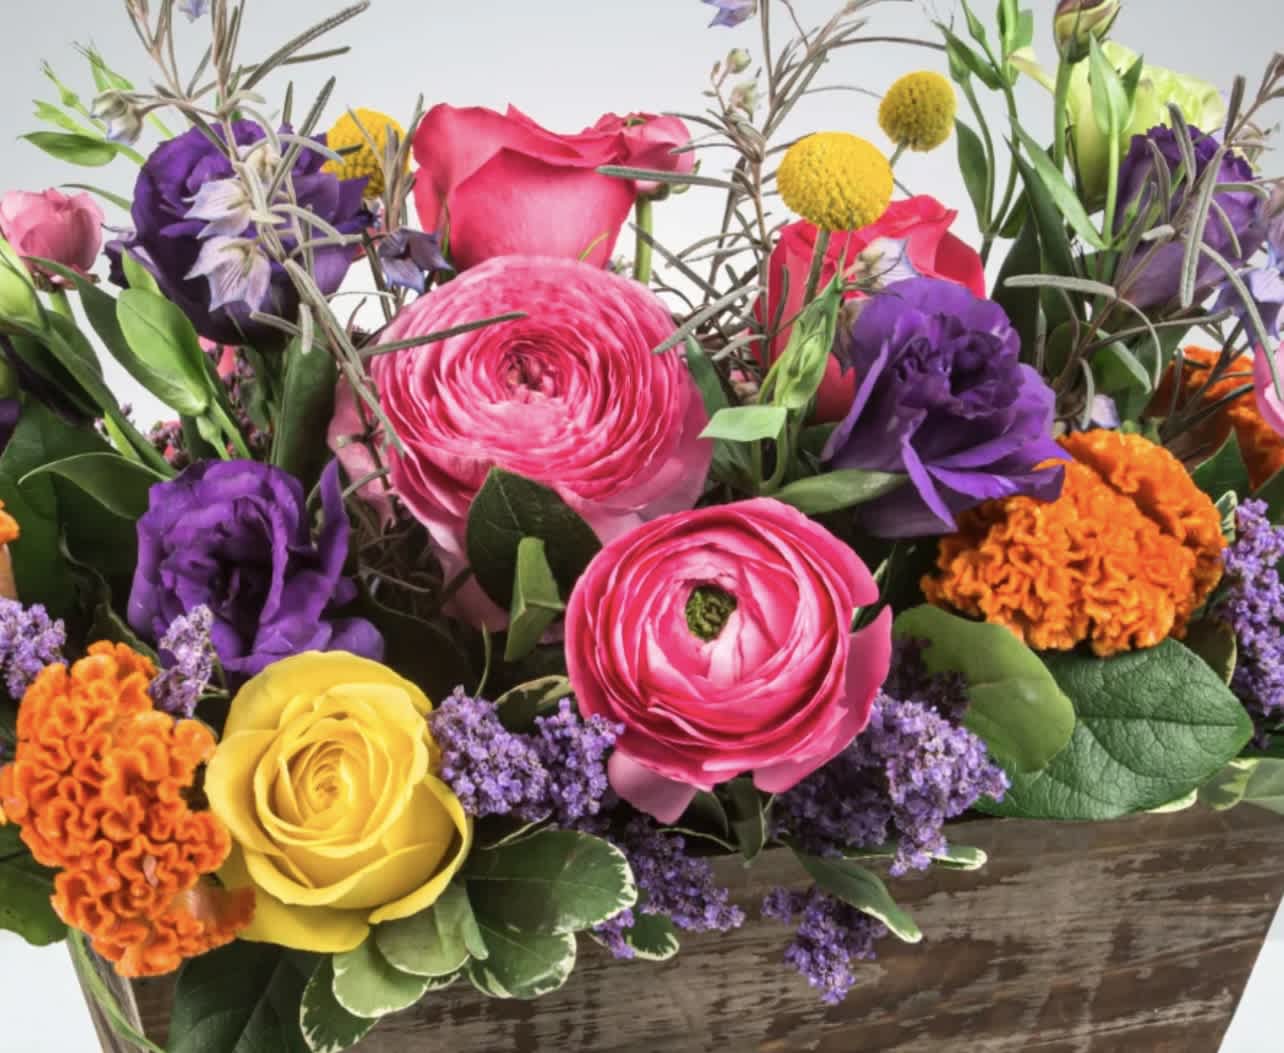  Seasonal bright and colorful designer's mix - let our designer use the best product to create a beautiful arrangement